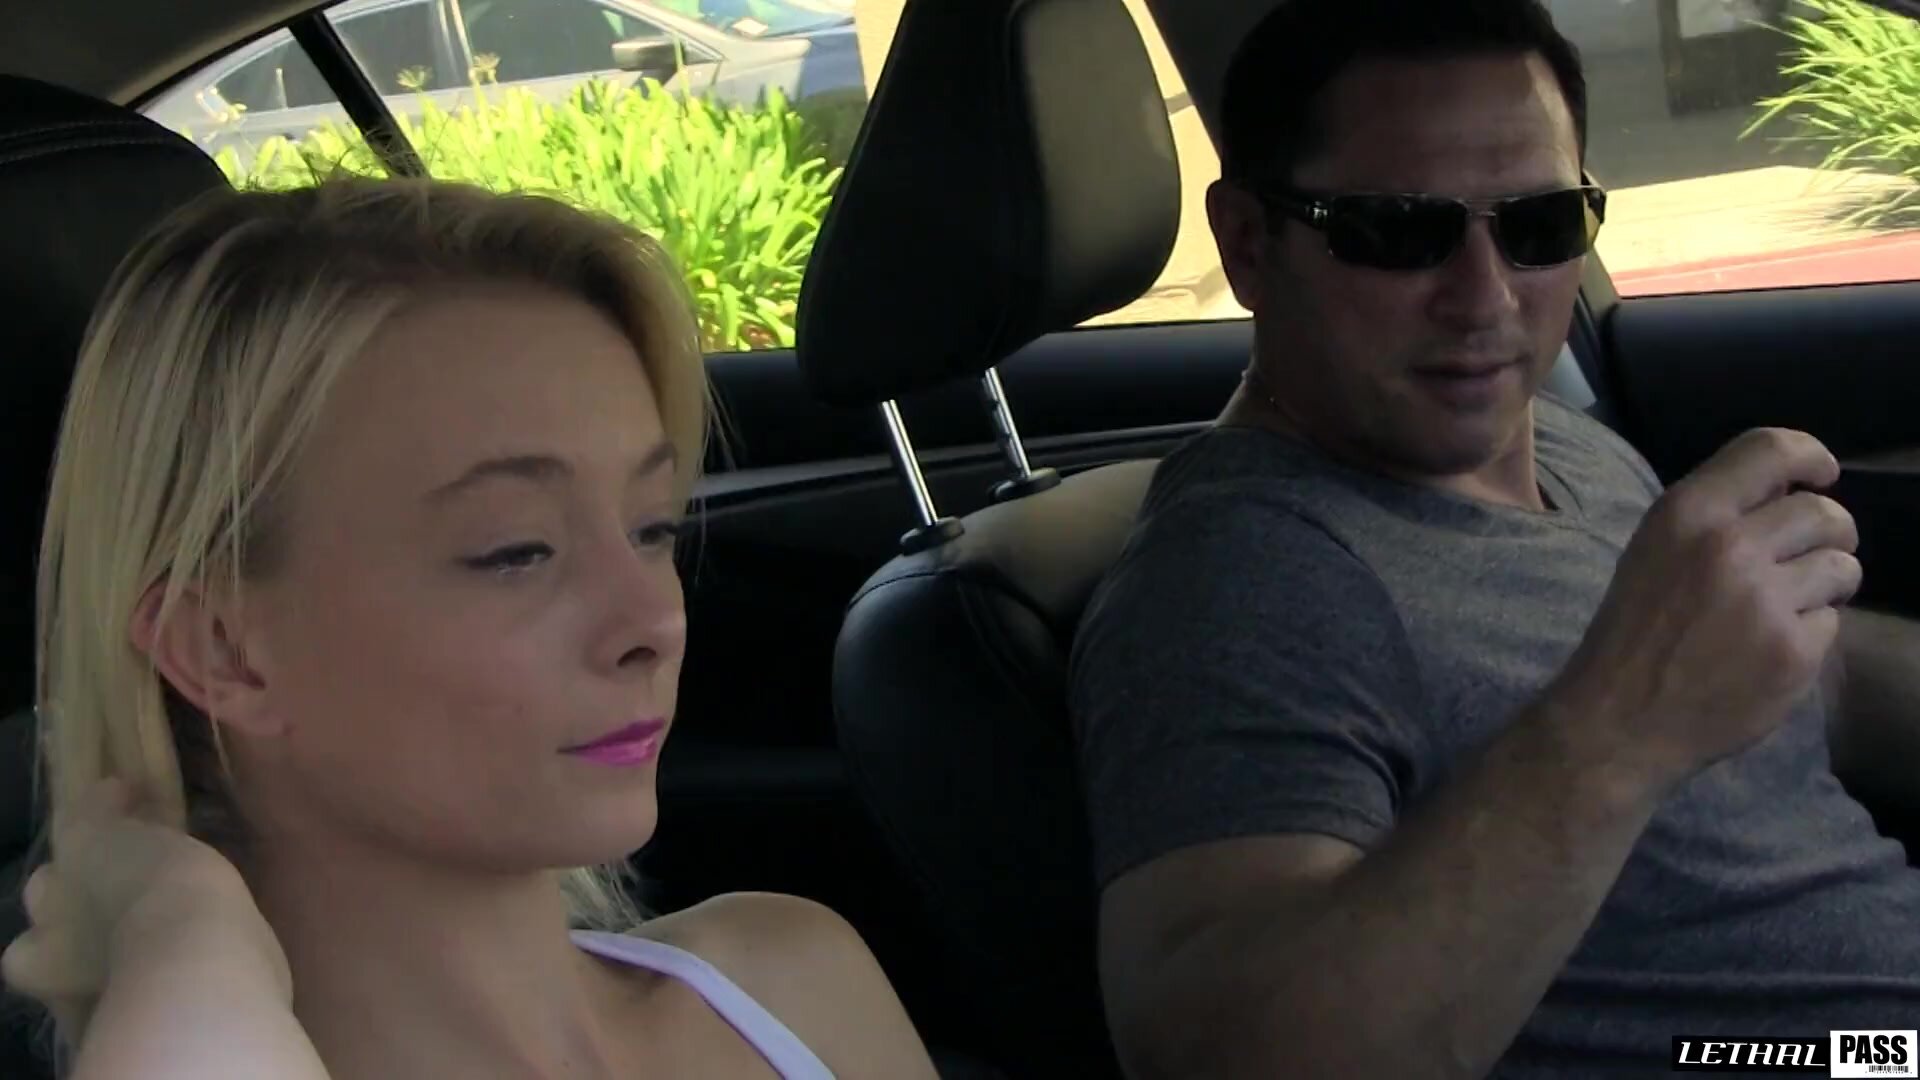 Blonde teen Maddy Rose banged in the car